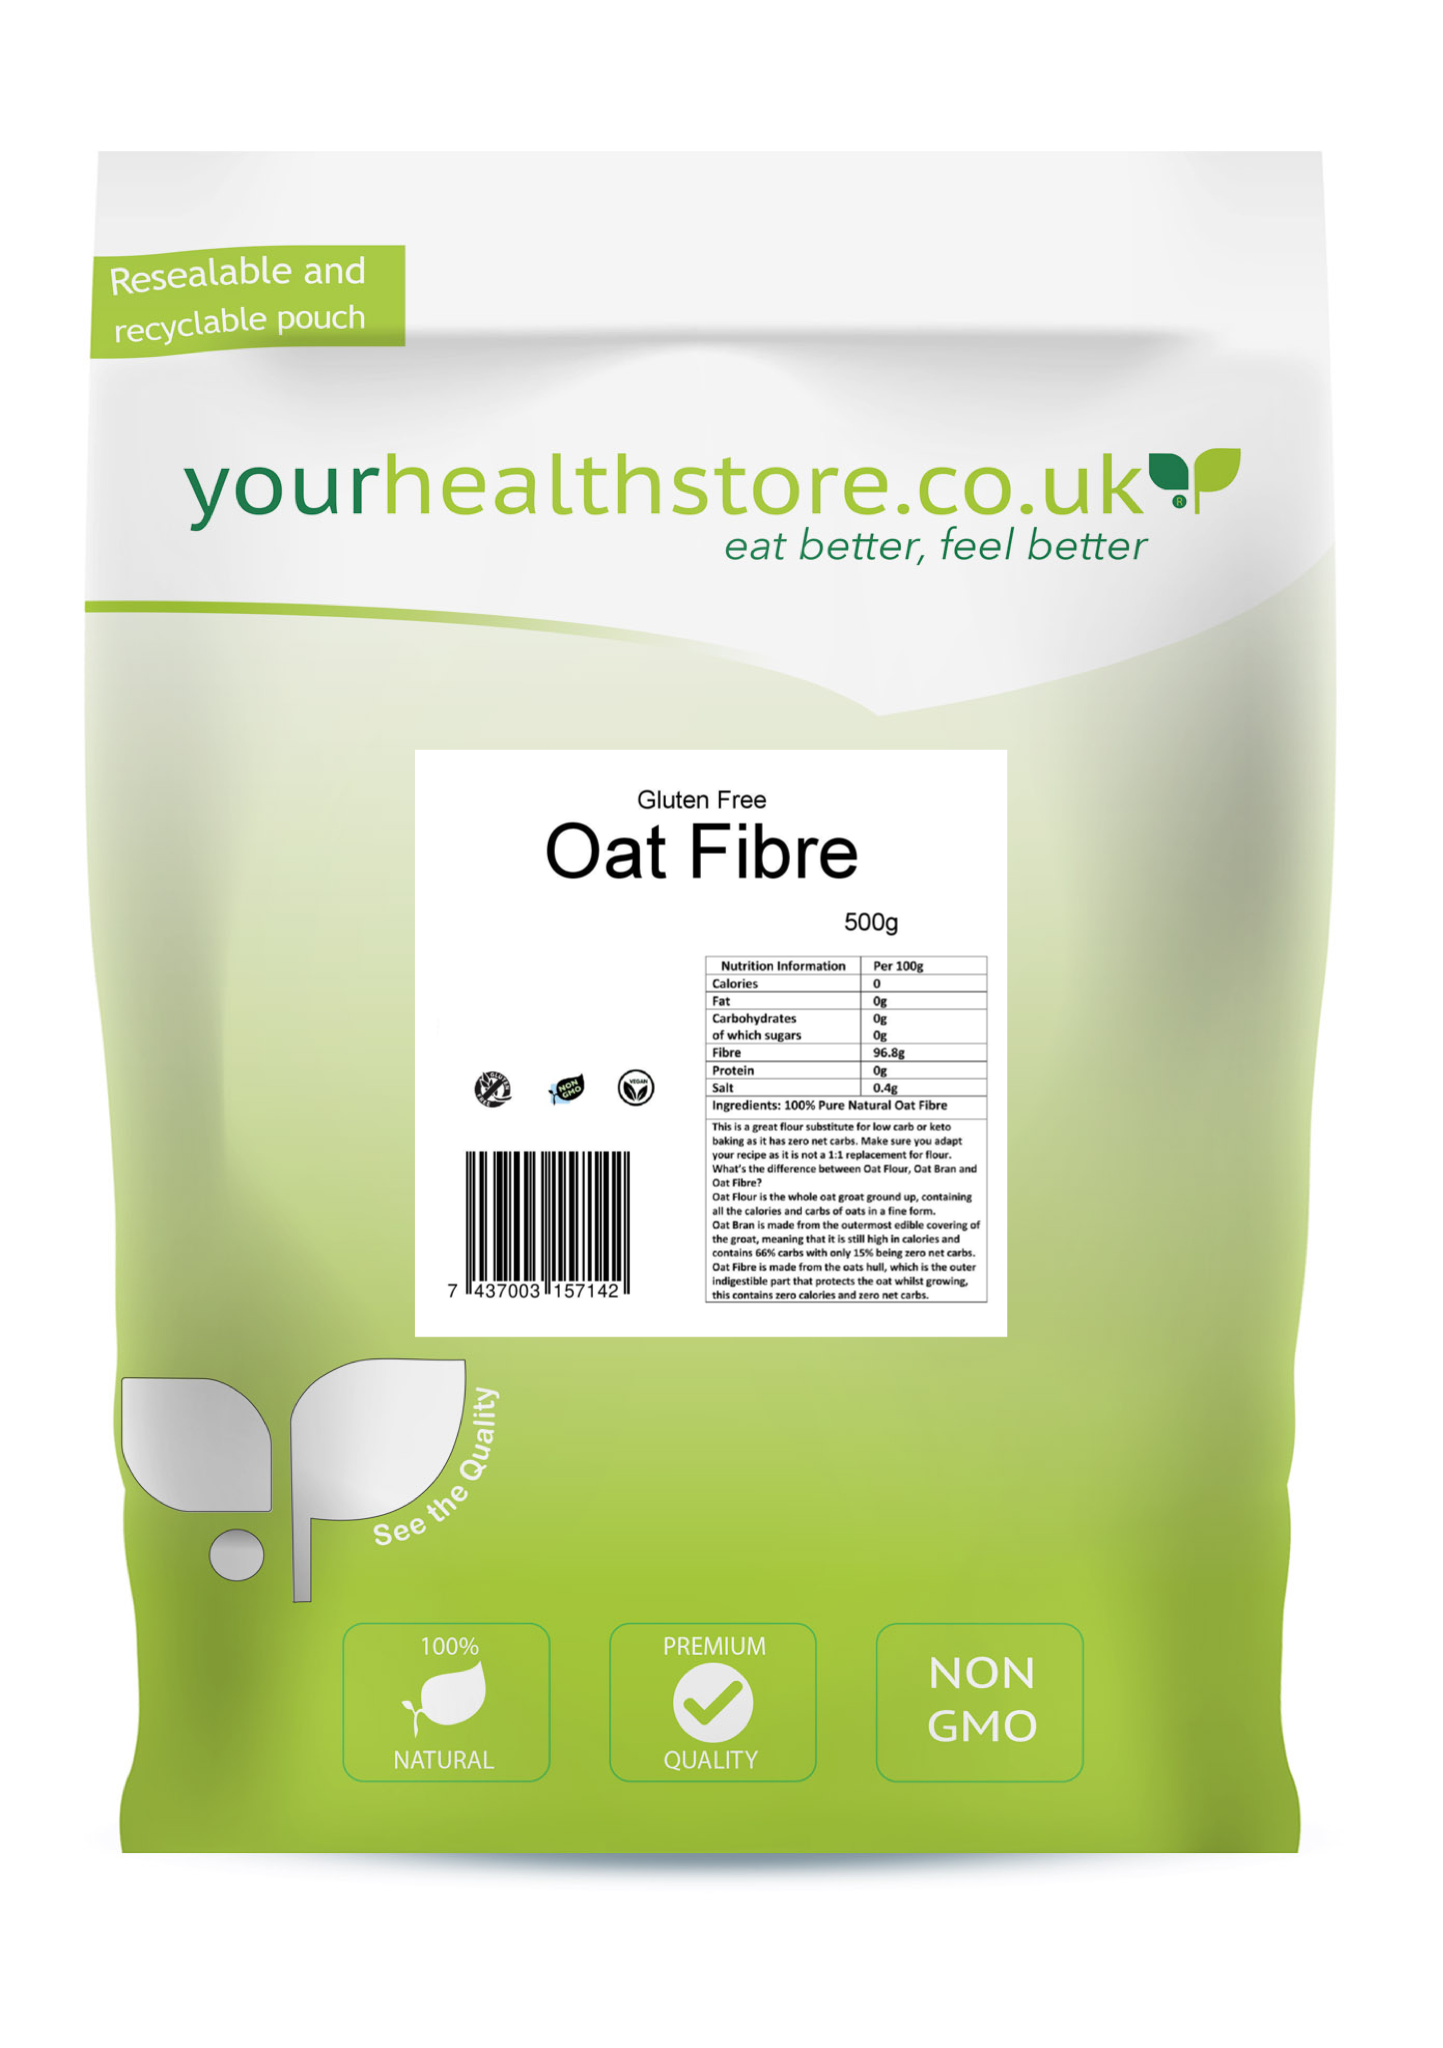 yourhealthstore Premium Oat Fibre 500g (1.1lb), Extra Light and Fluffy, Great for Keto King Bread, Vegan, Produced in The EU, (Recyclable Pouch)